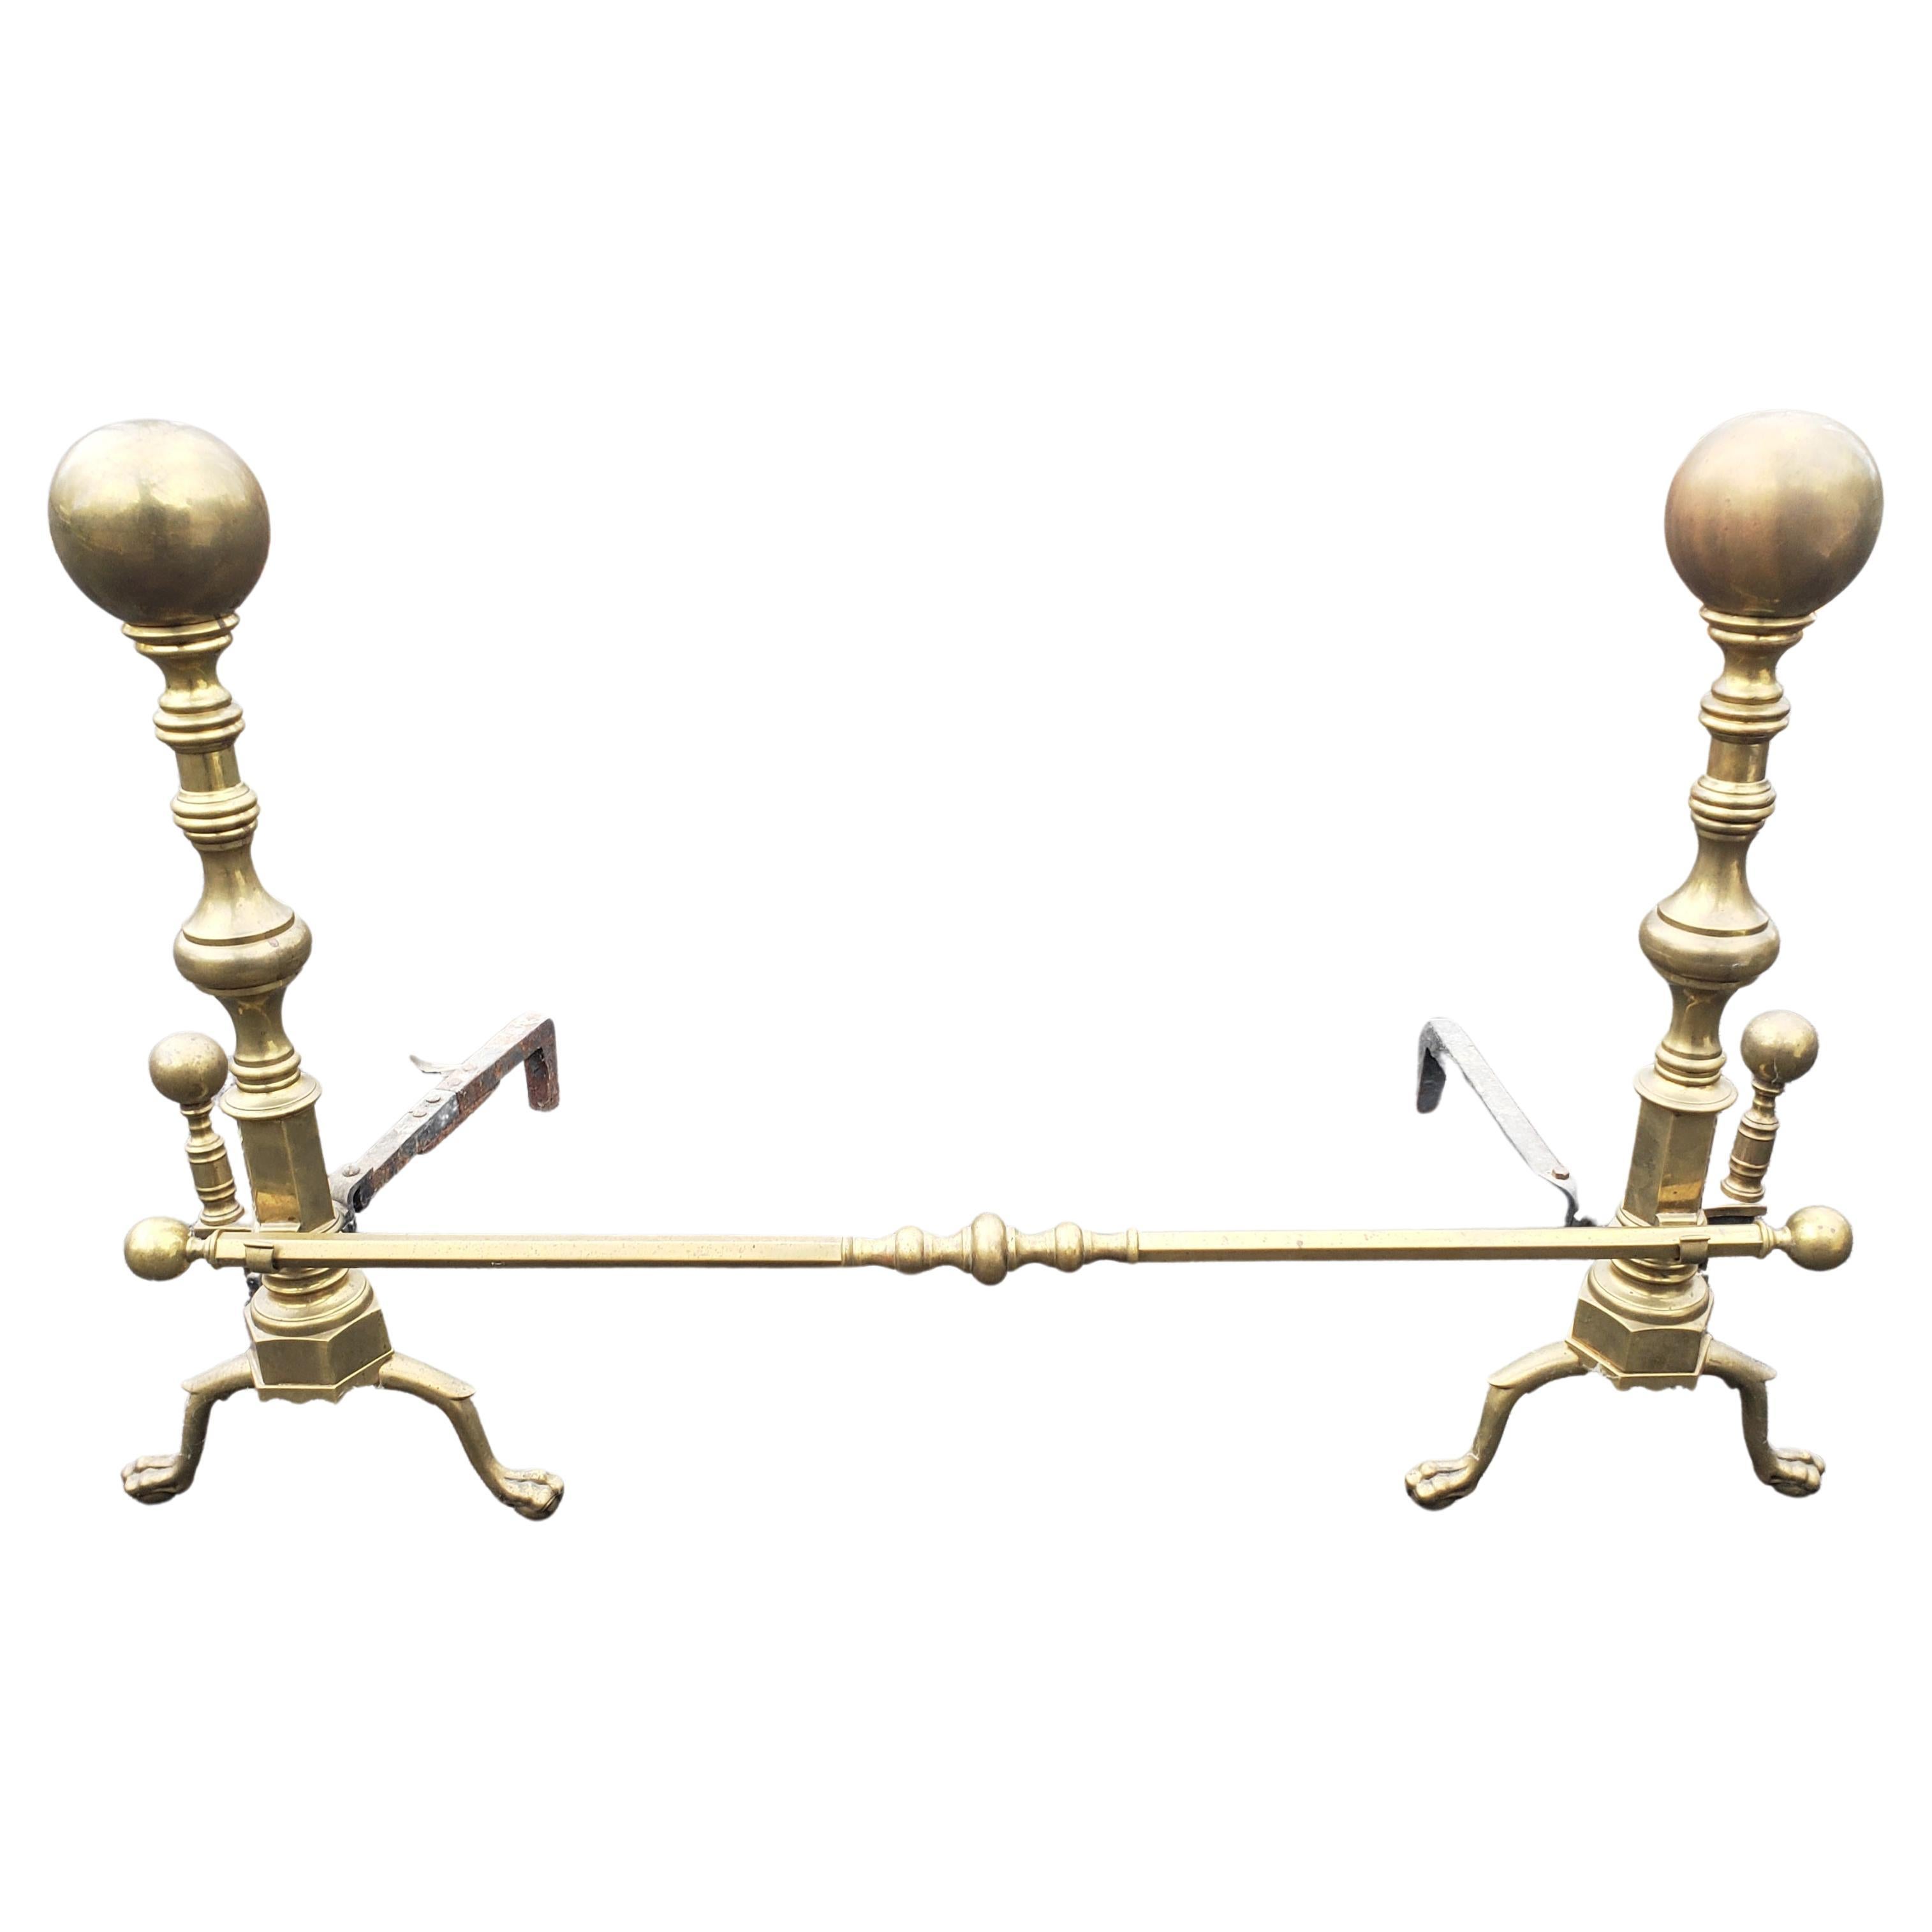 Vintage Solid Brass Andirons with Roll Bar, Circa 1920s